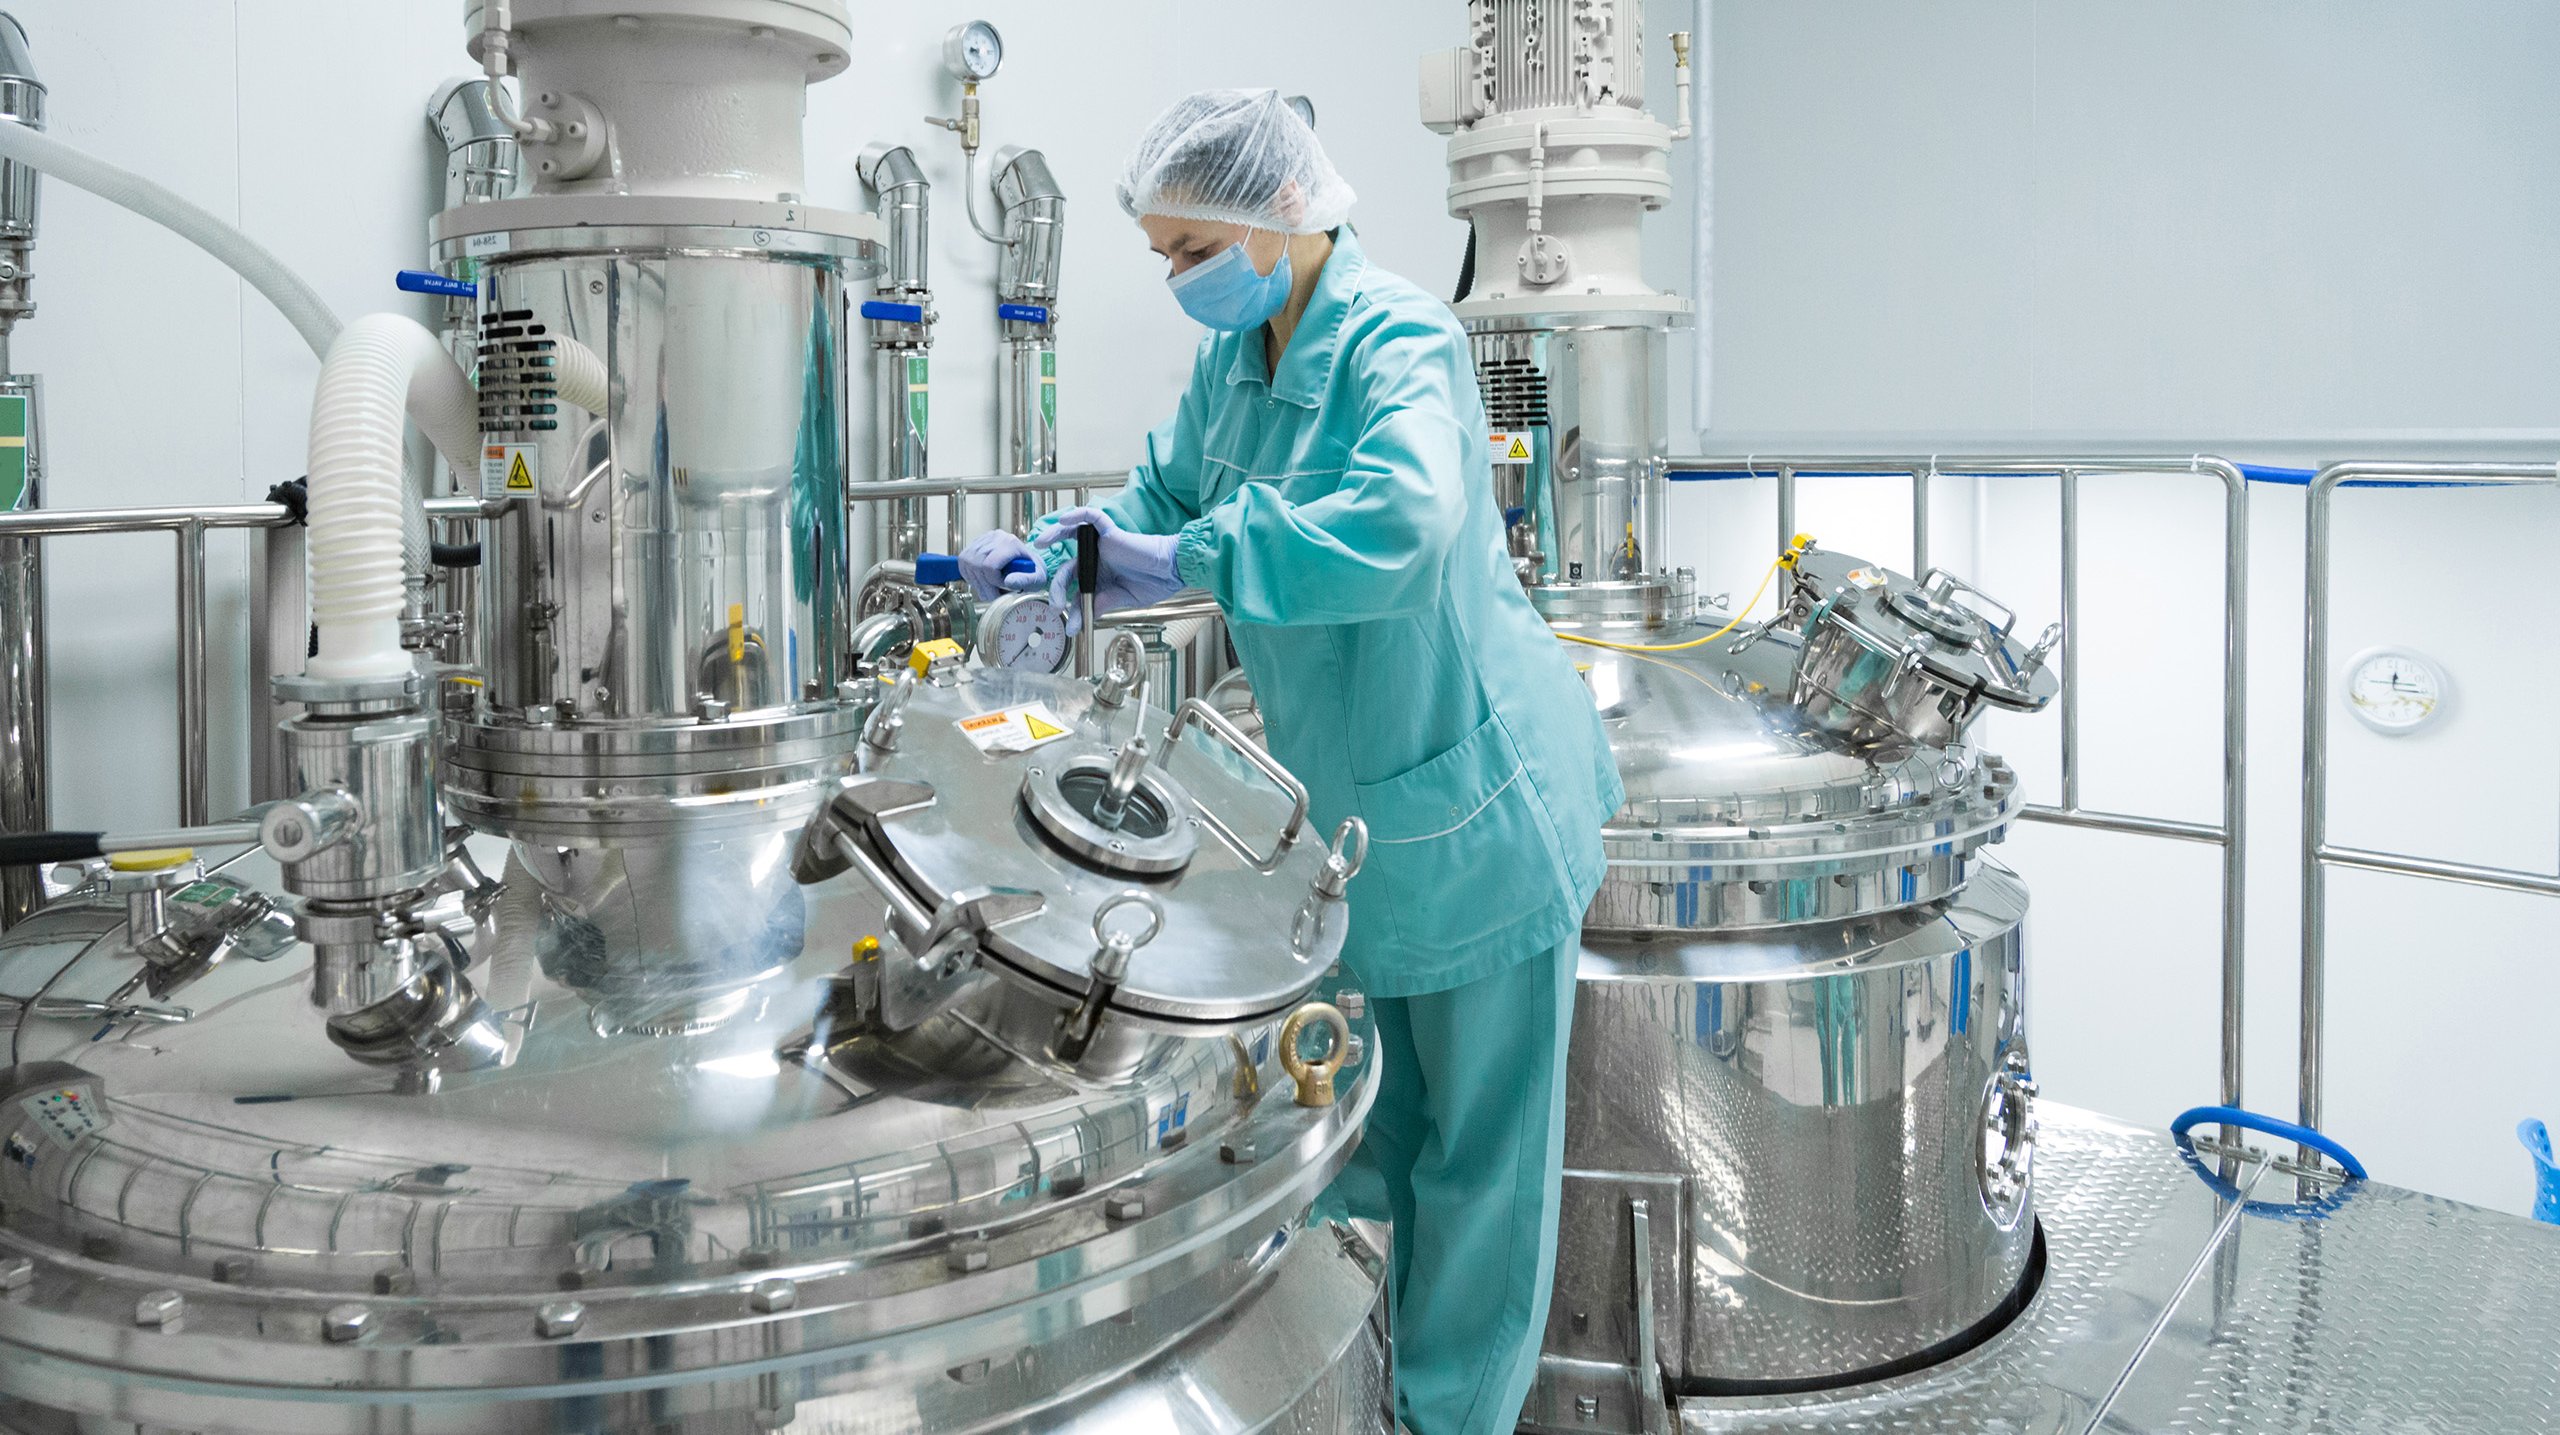 Pharmaceutical technician in sterile environment at pharmacy industry